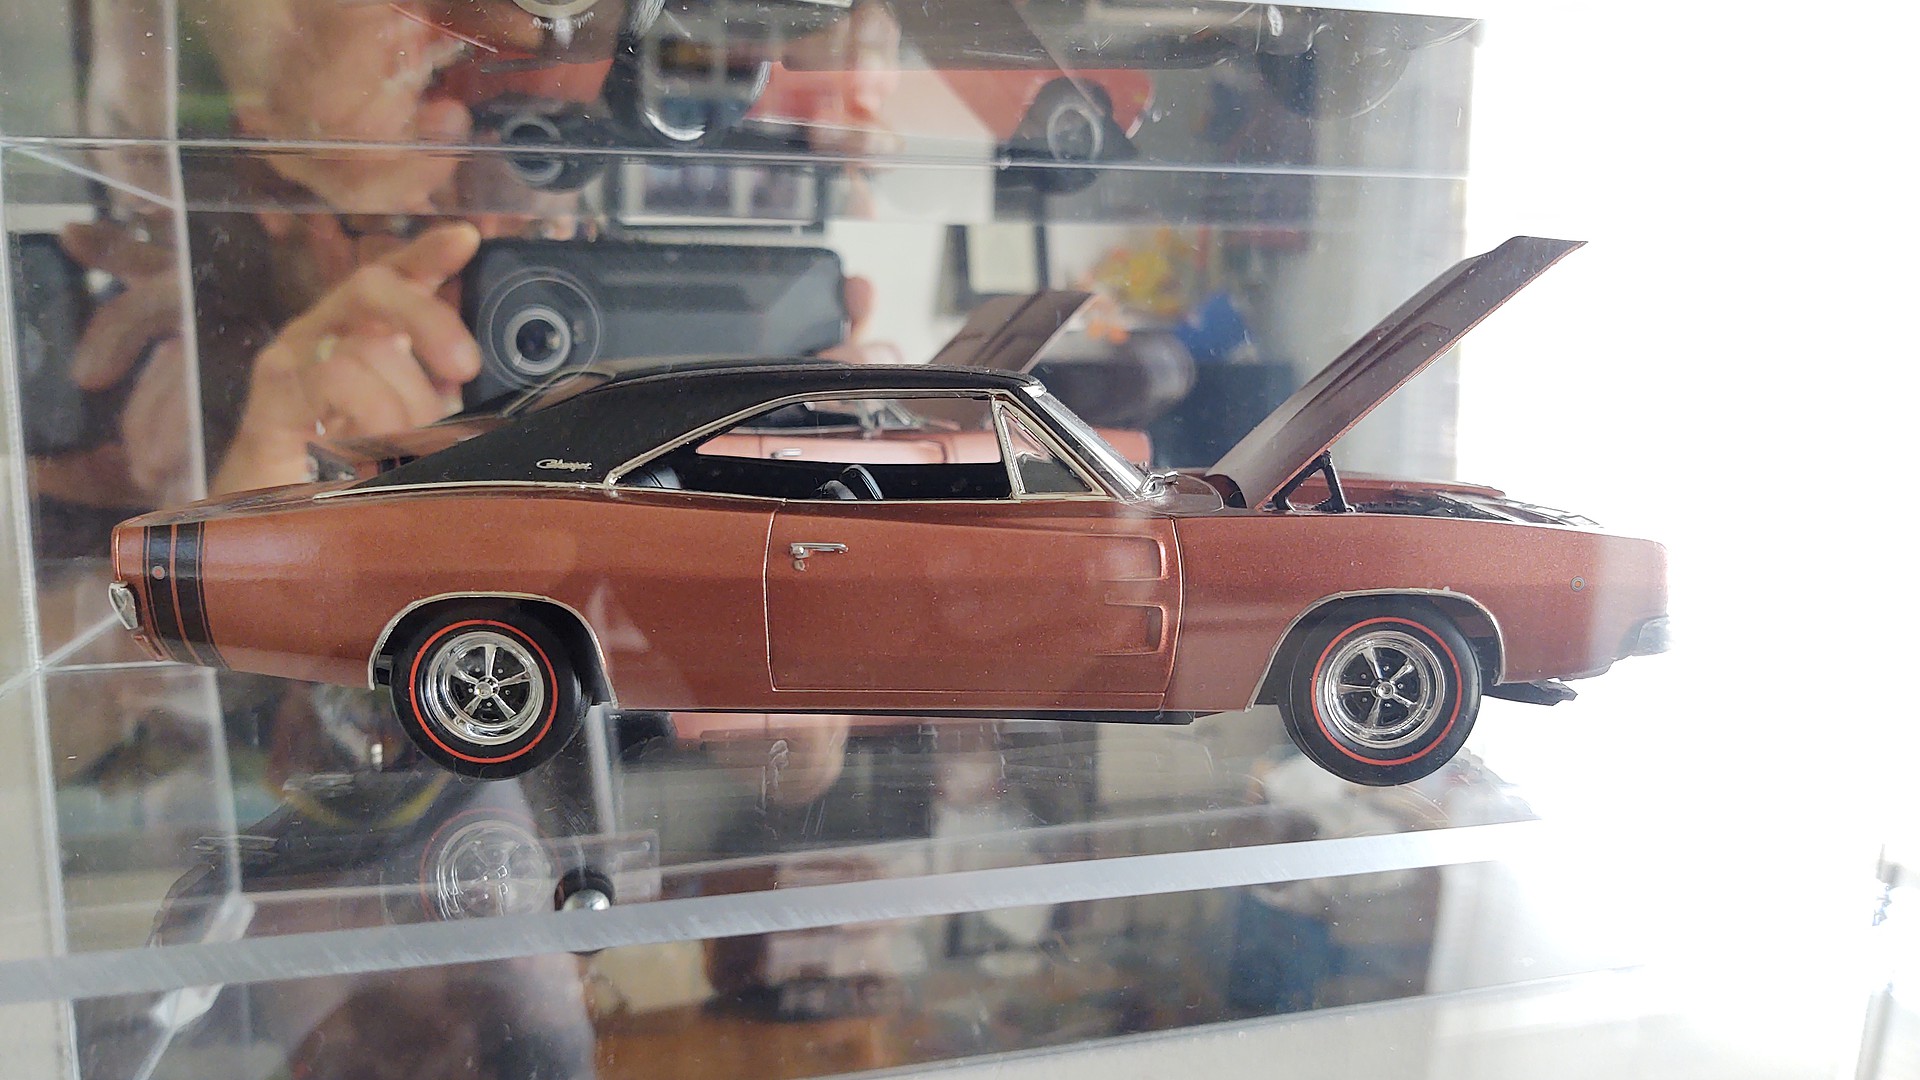 Summit Gifts 85420220002 Revell 1:25 1968 Dodge Charger R/T Model Kit